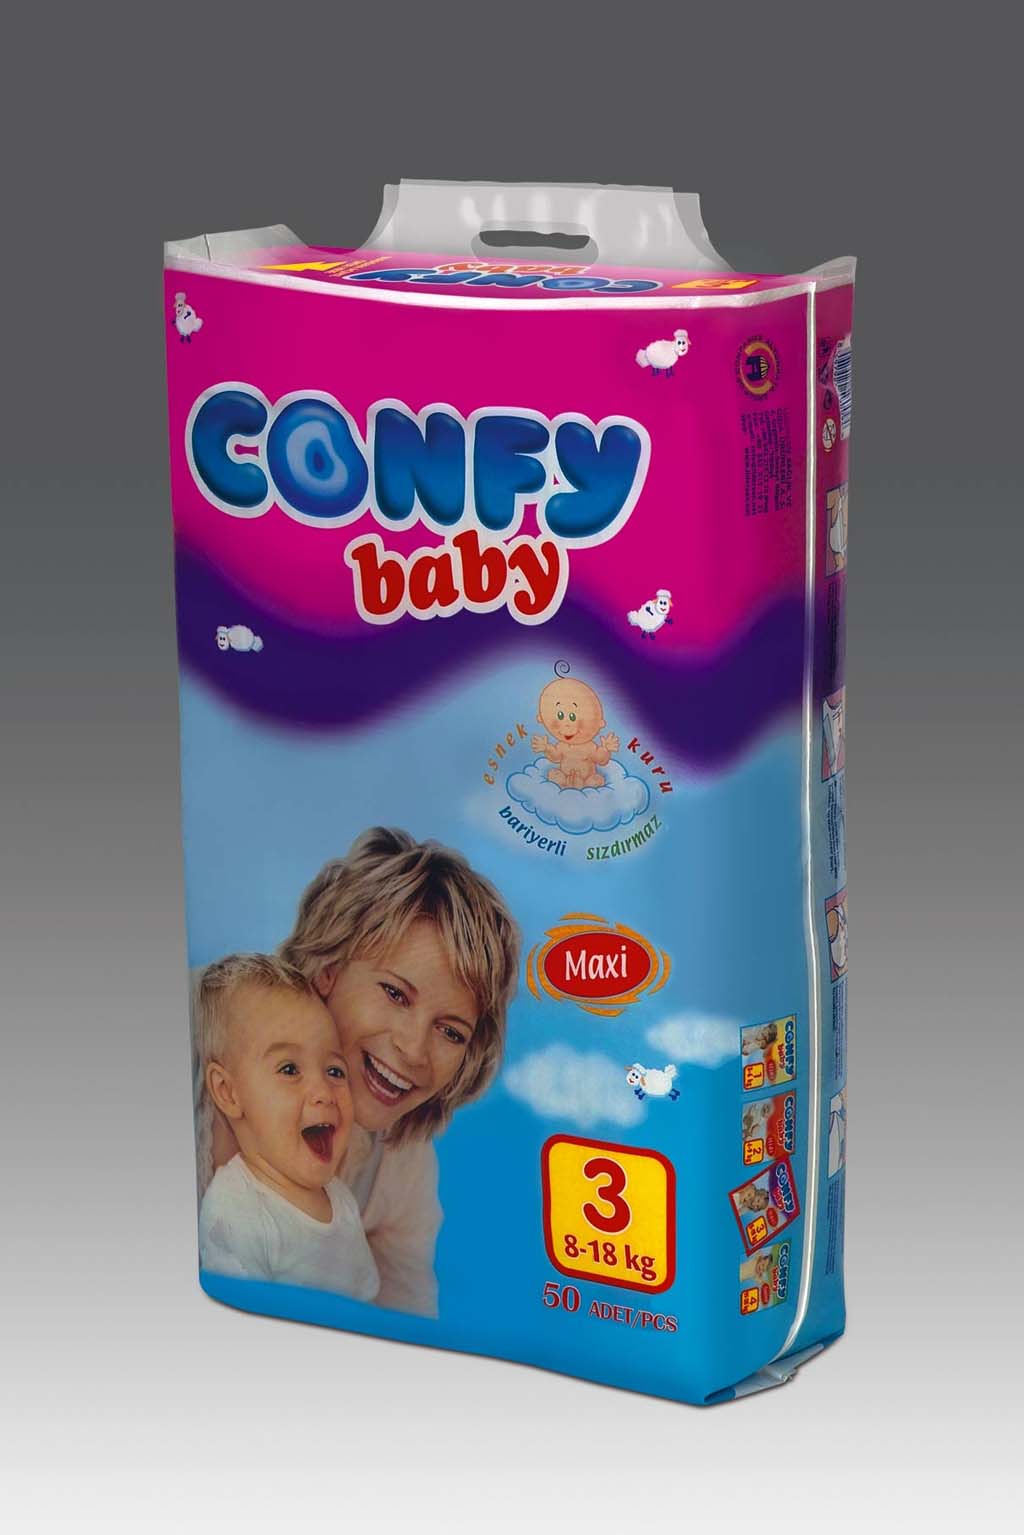  Confy Baby Diaper (Confy Пеленки Младенца)